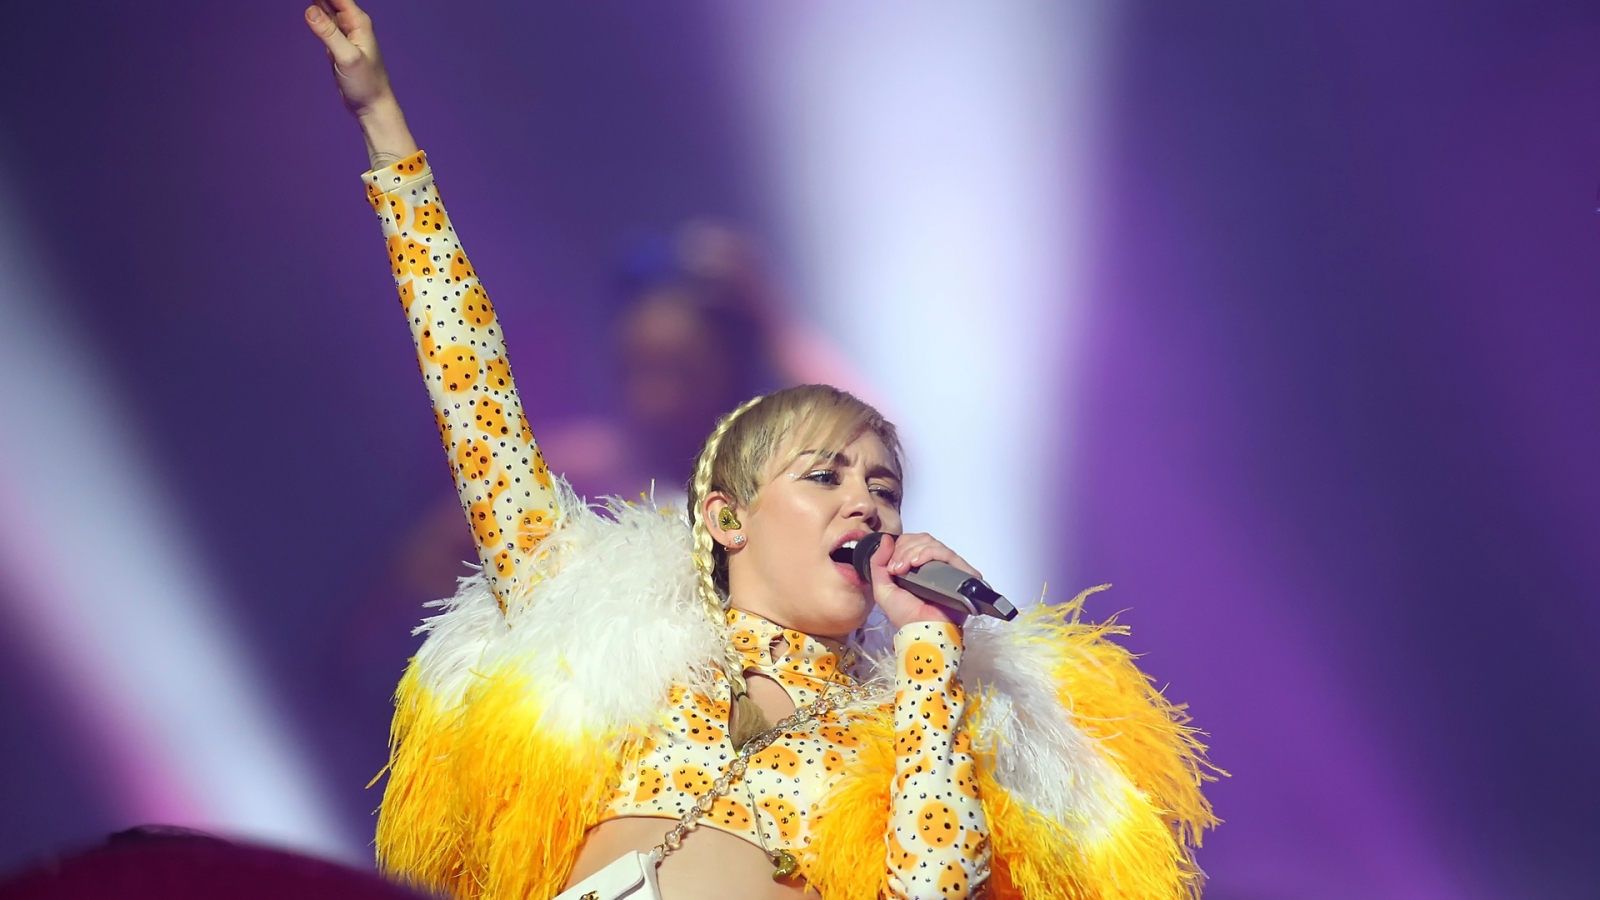 Miley Cyrus Live Performance for 1600 x 900 HDTV resolution